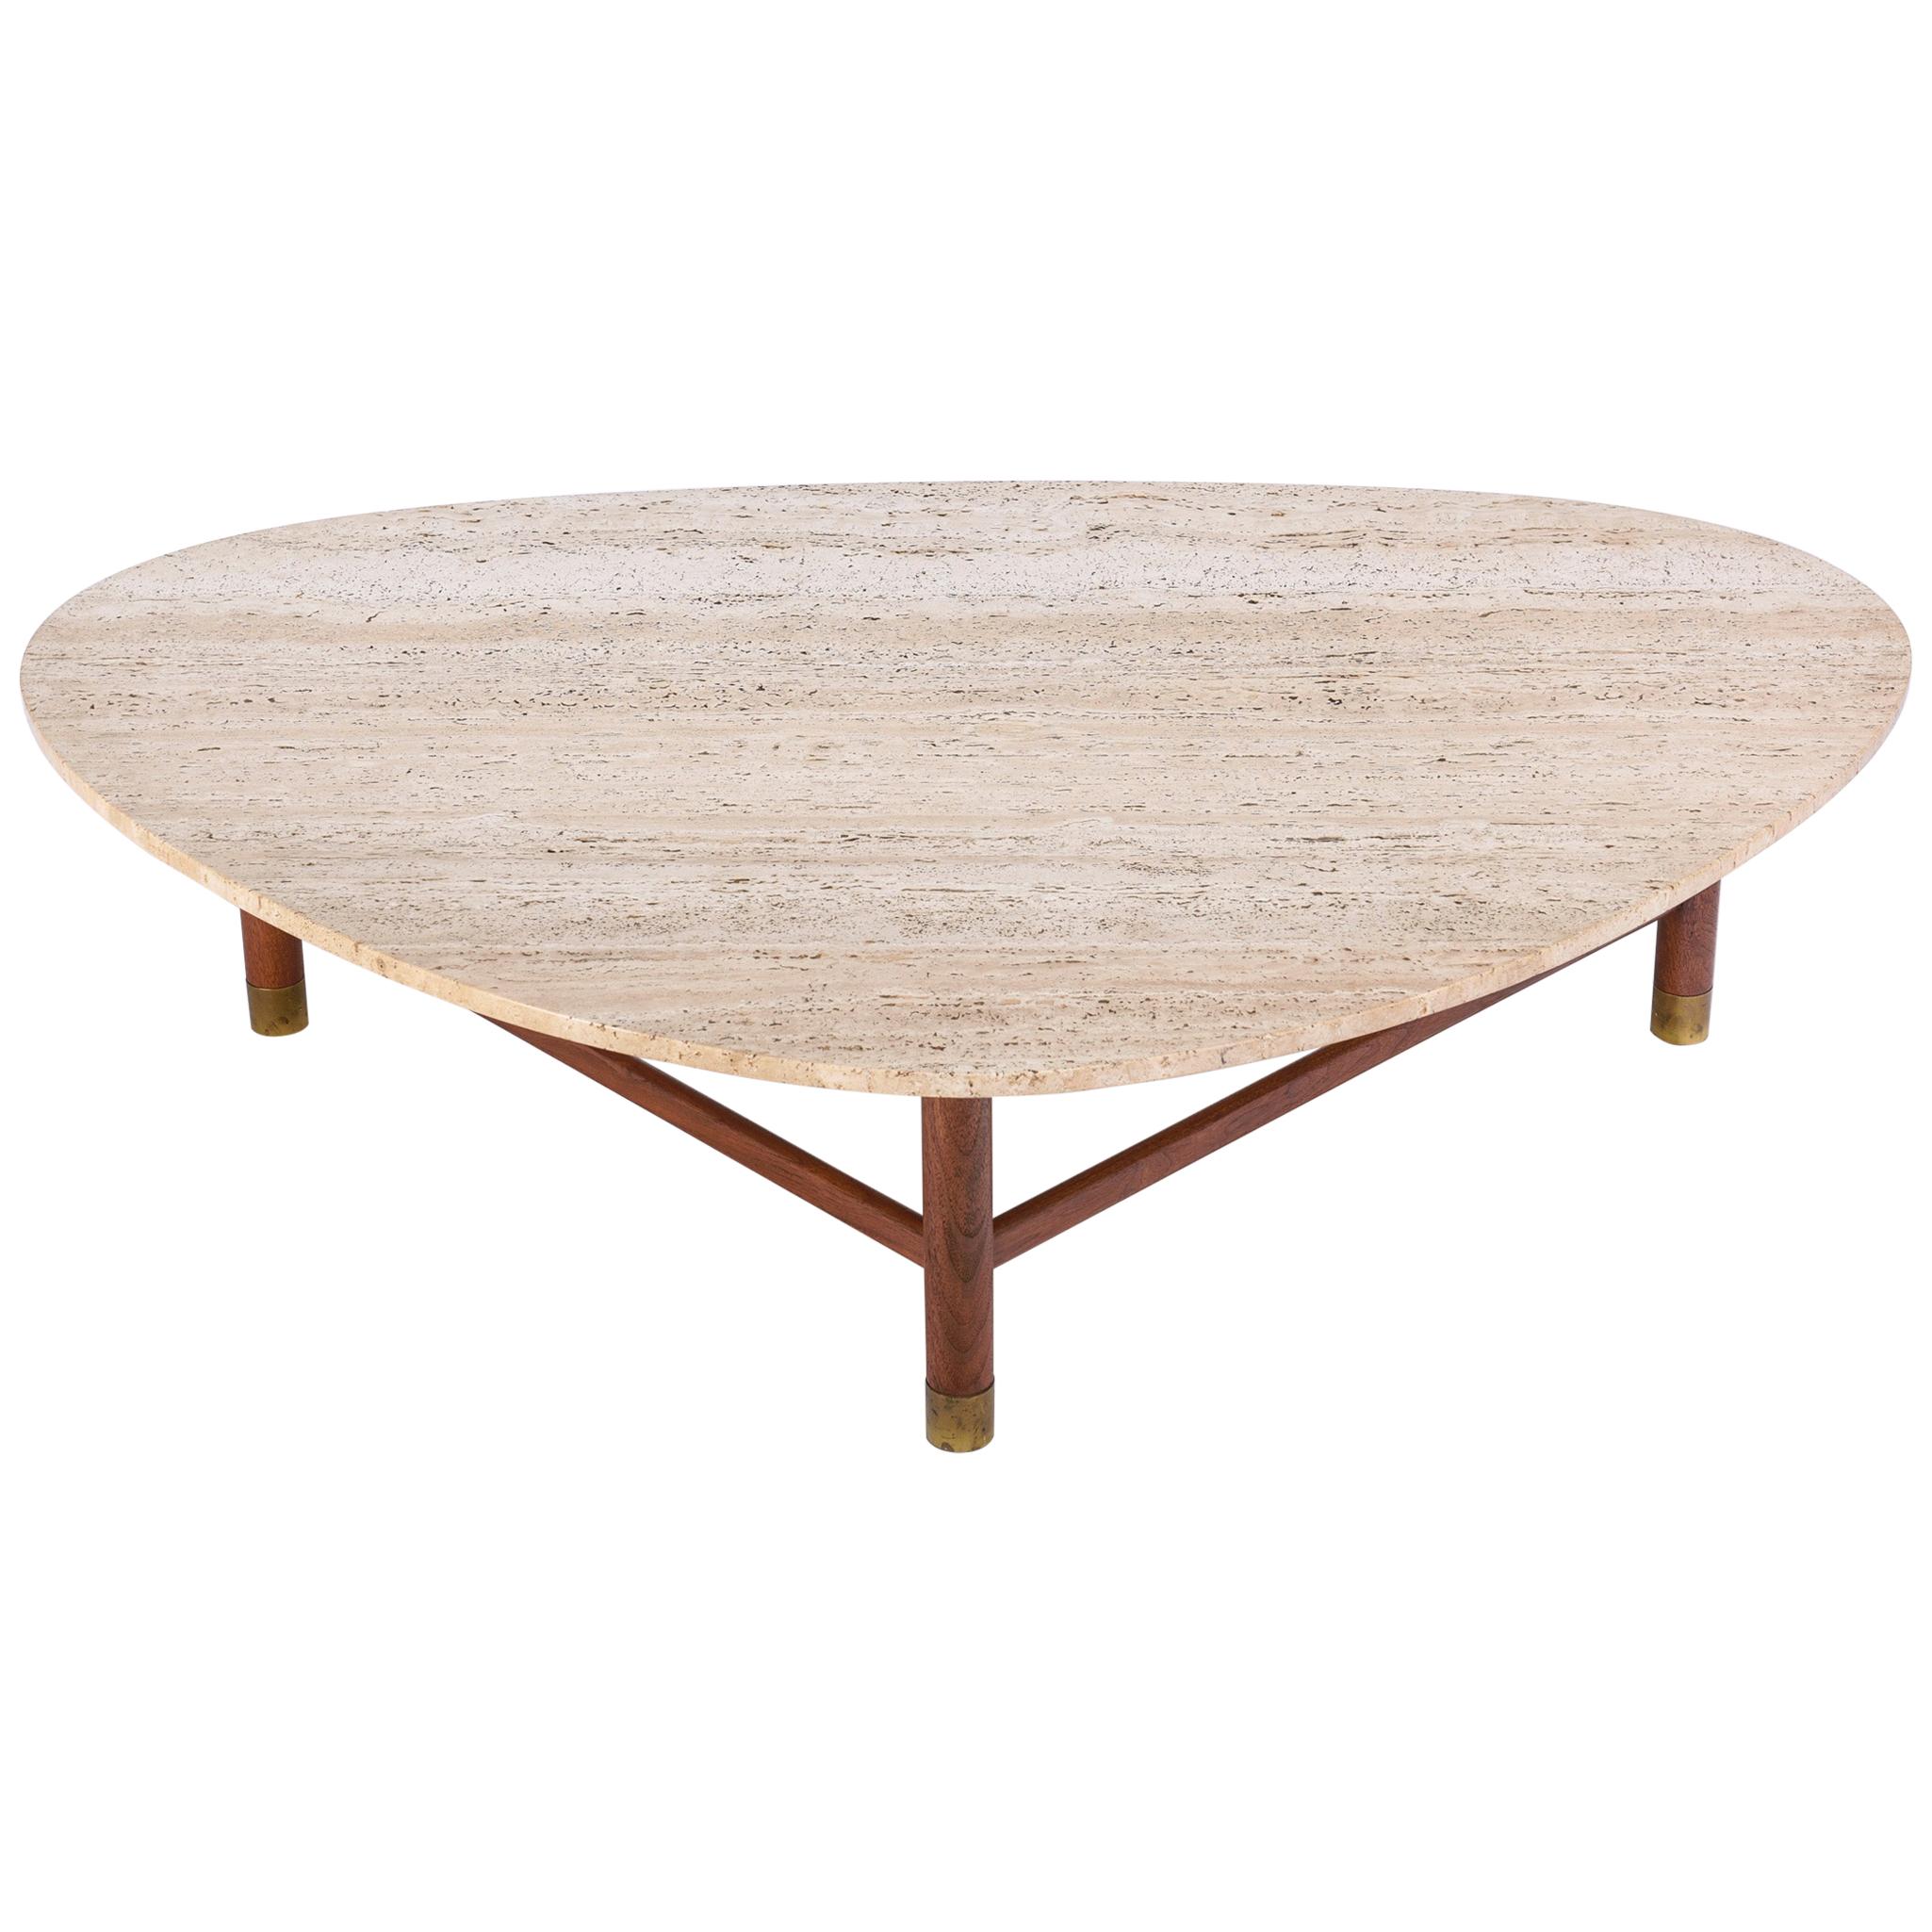 Harvey Probber Coffee Table with Travertine Top